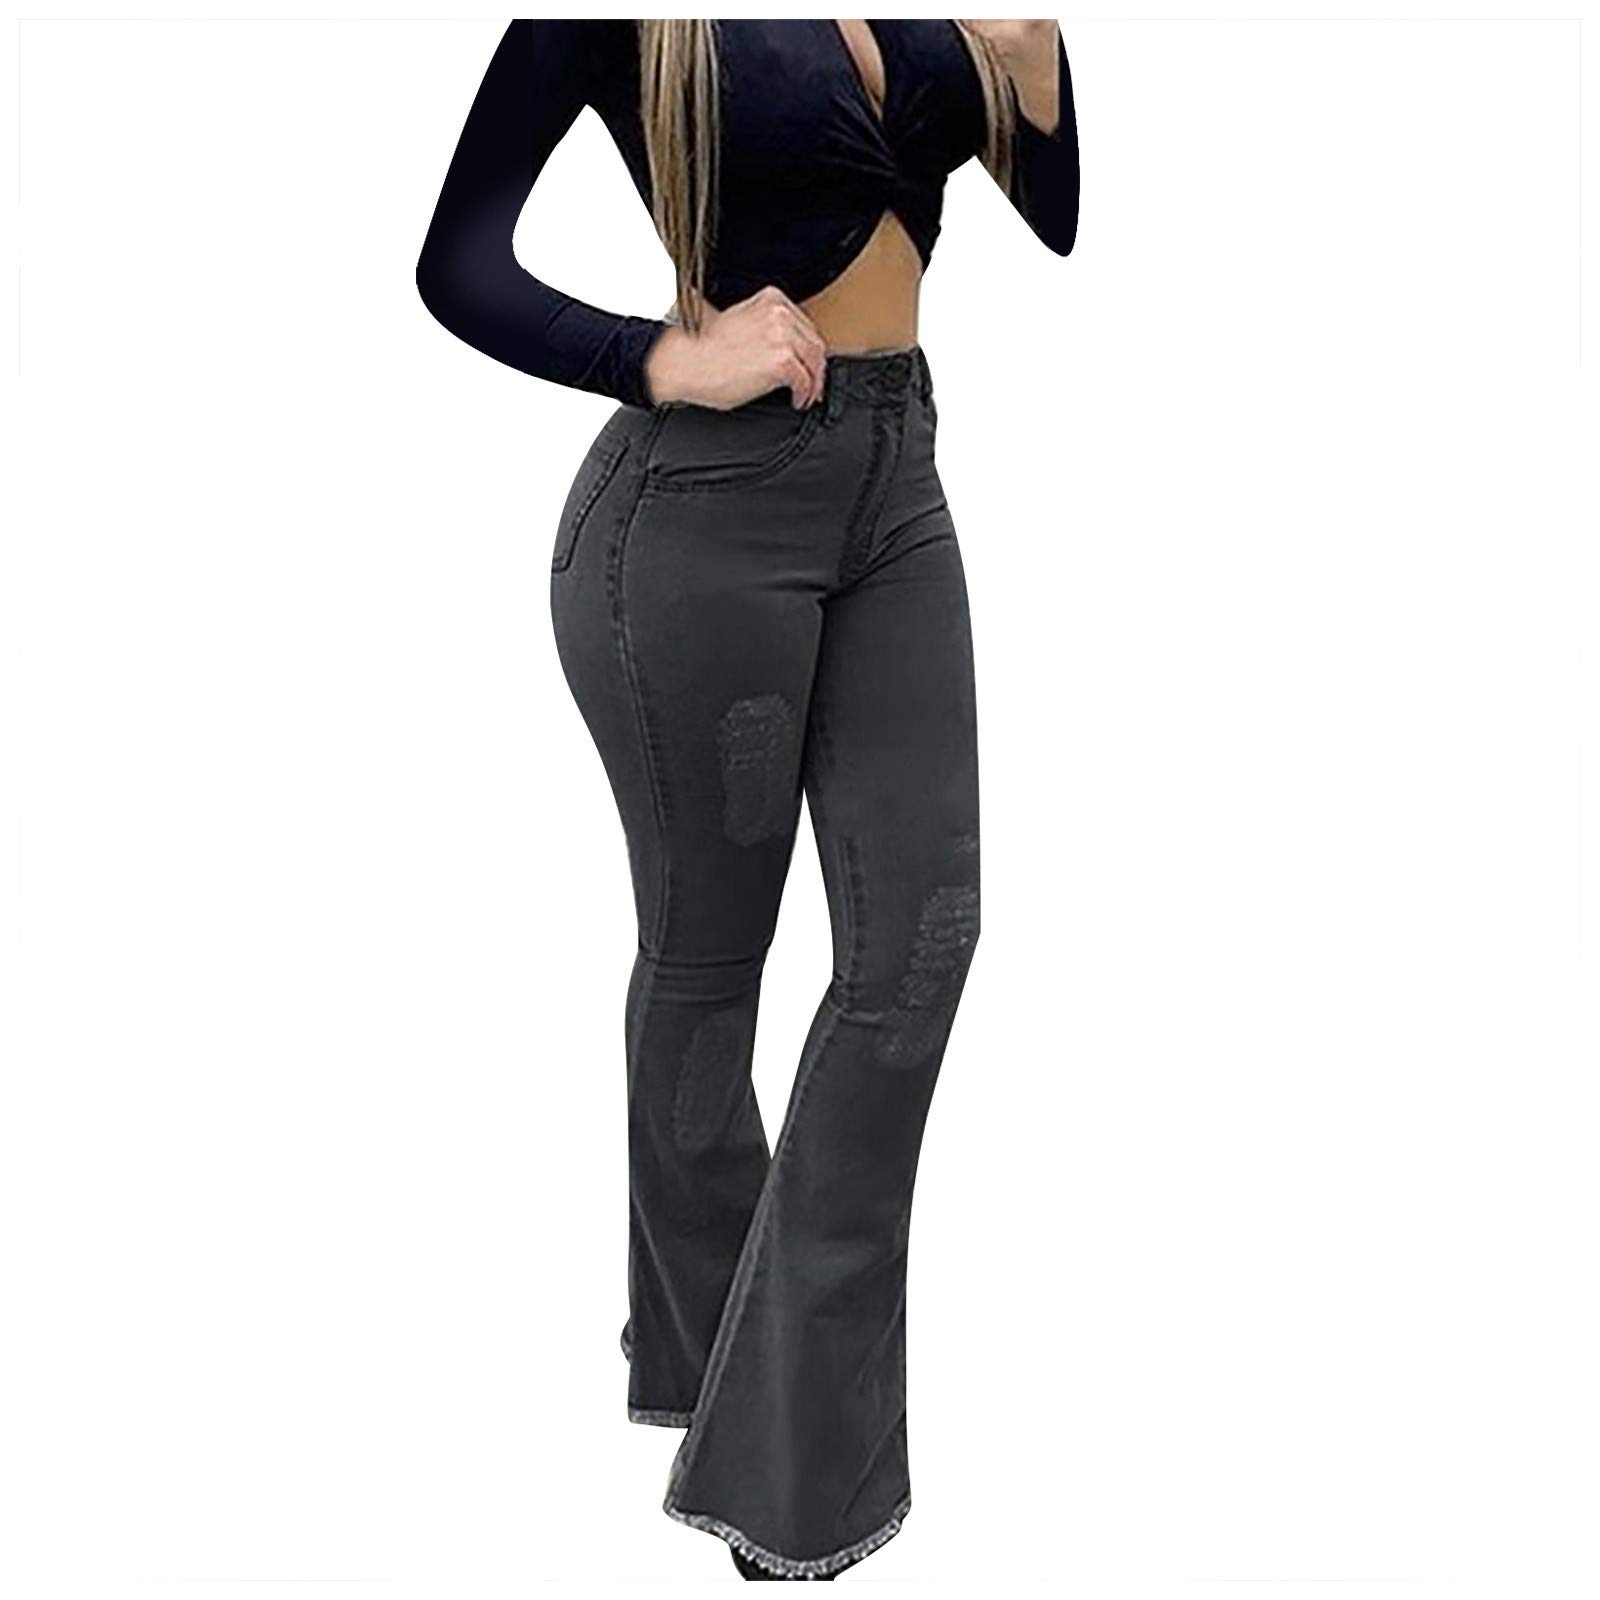 Women Solid Color Solid Flared High Jeans Flares Ankle Fashion Pants  Trouser Yoga Dress Pants for